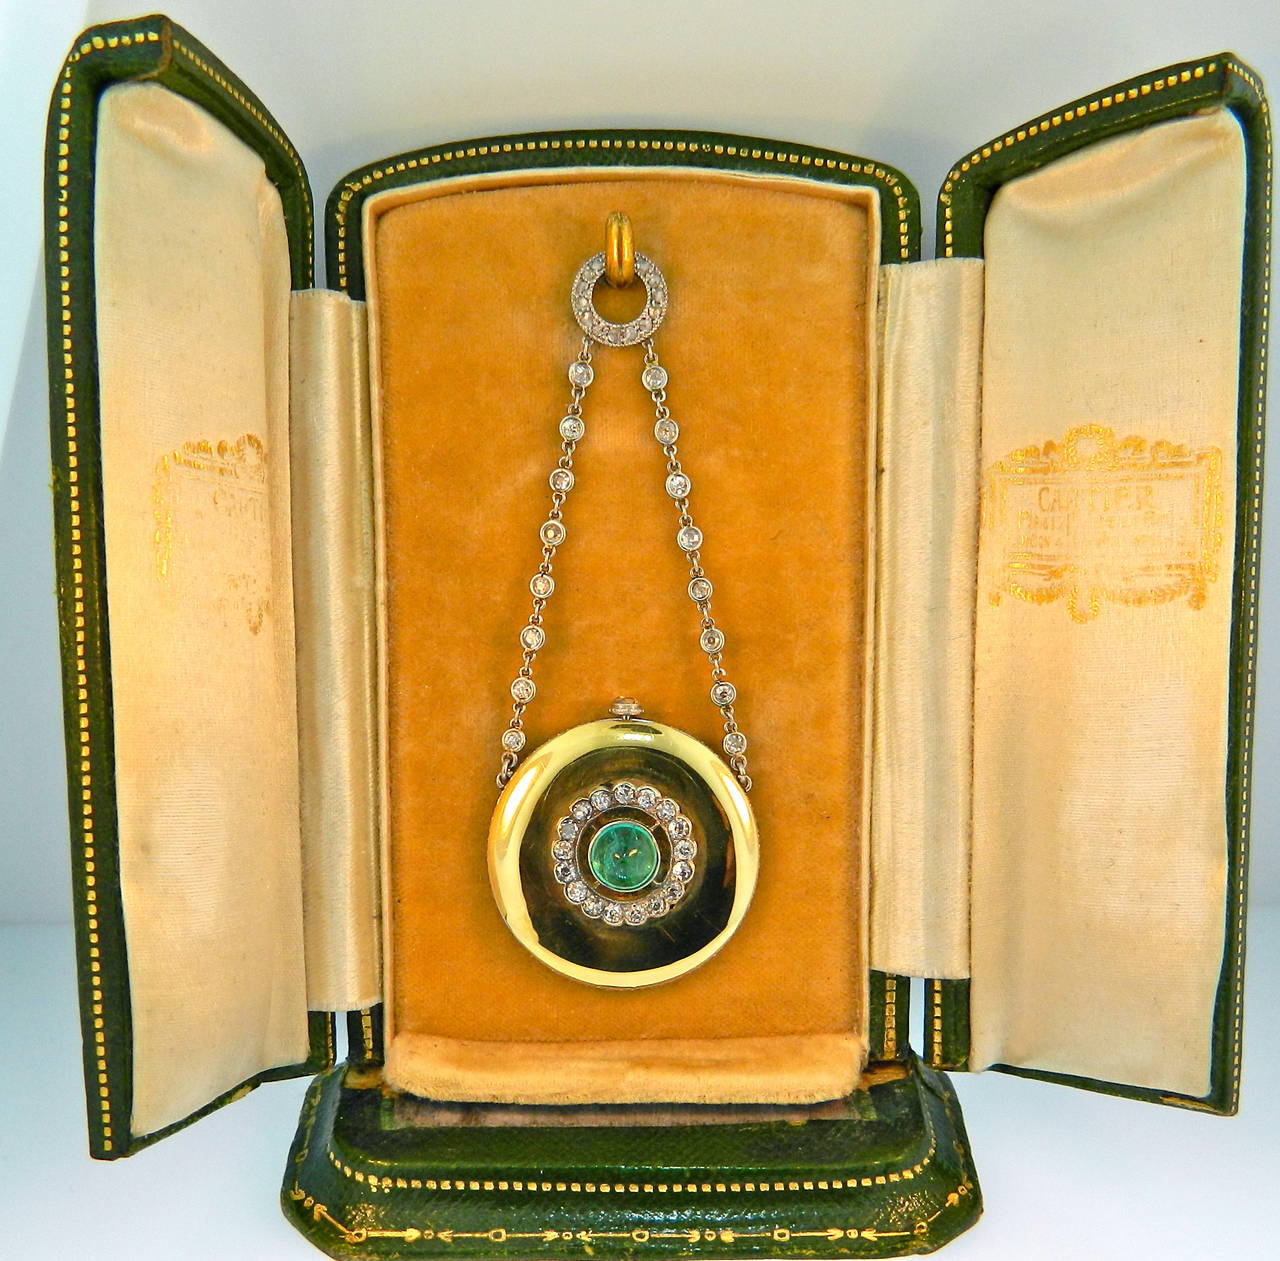 A Stunning Belle Epoque Cartier Paris Diamond, Emerald, Platinum & Gold Watch Pendant in it's original Box.  Circa 1900.  Dial Signed Cartier.  Case with french marks for gold and Cartier Numbers.  Movement signed Cartier (Pre-EWC).